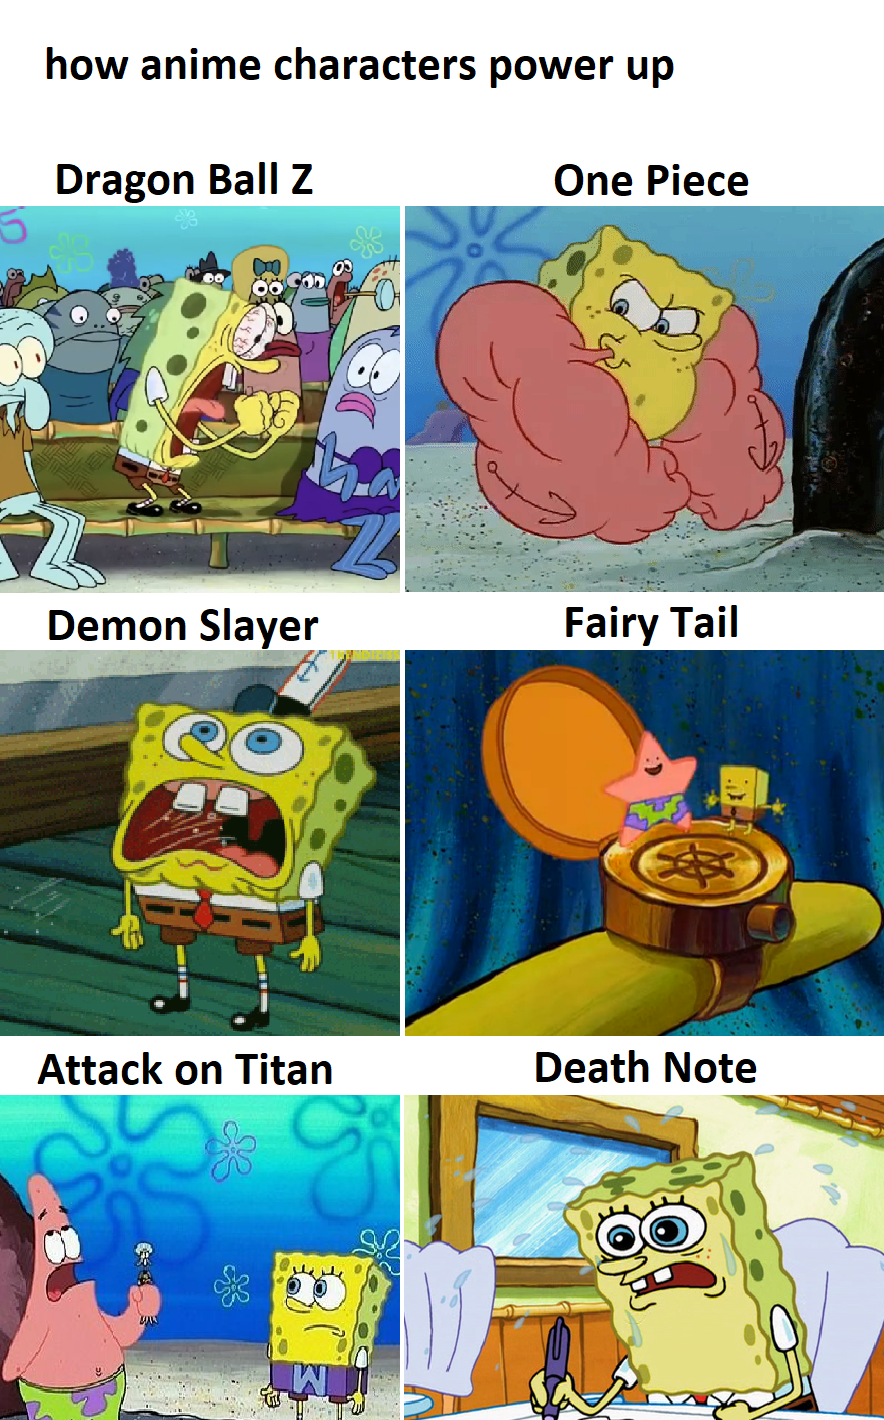 How anime characters power up by Spongebob